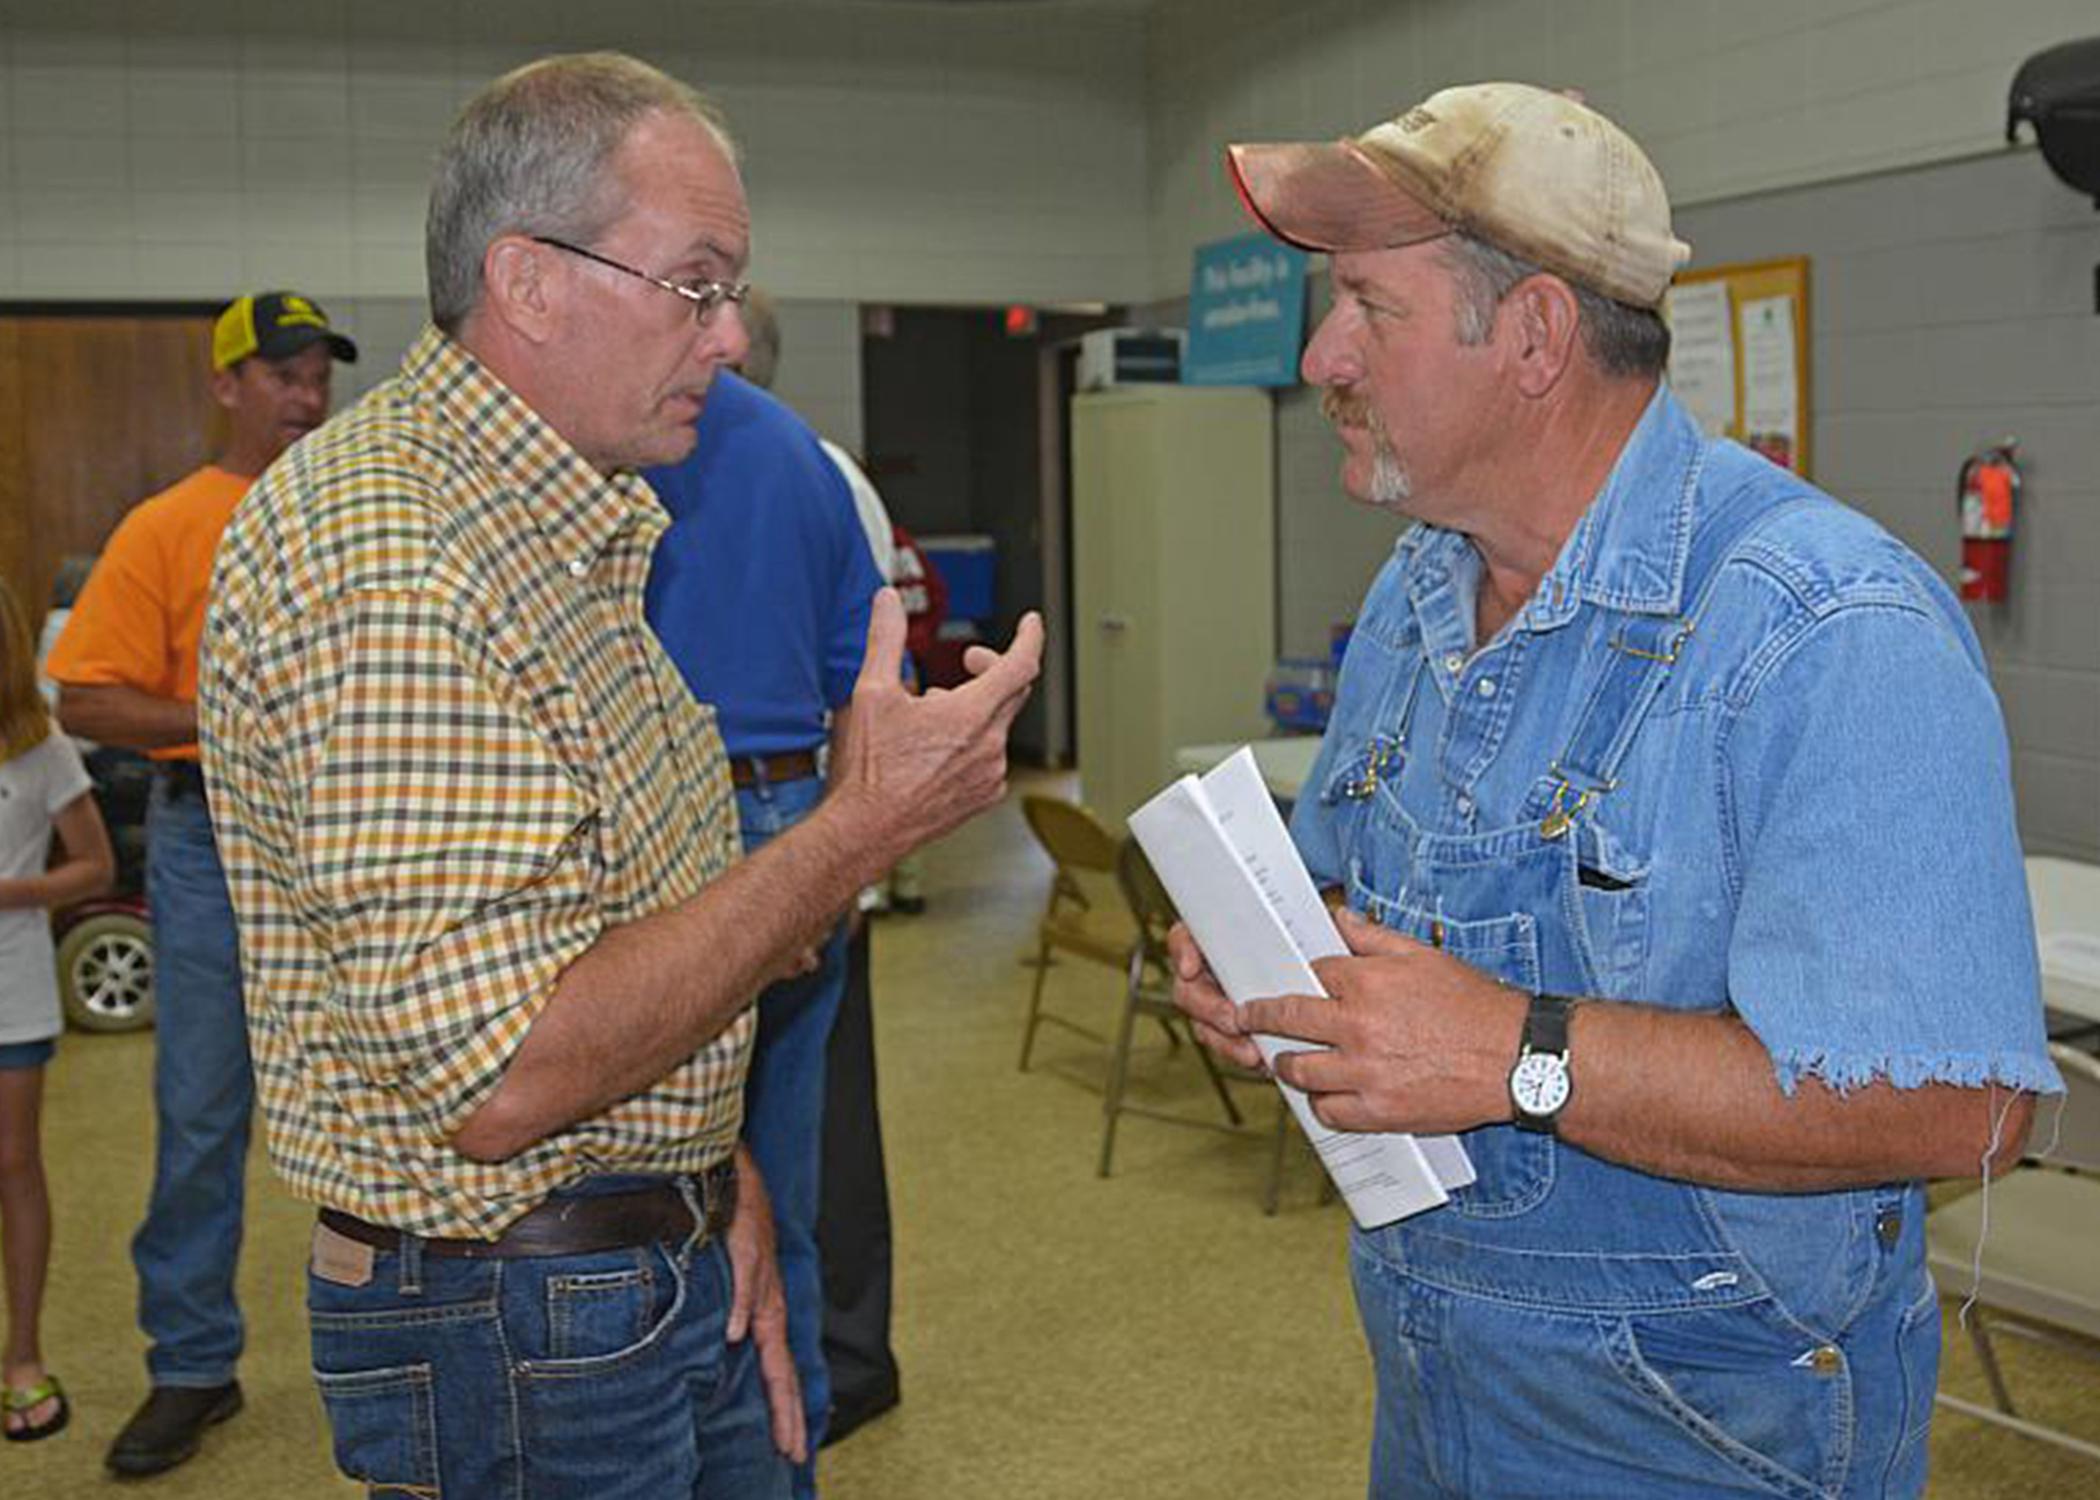 Winston County Extension agent Mike Skipper, left, discusses recovery issues from the April 2014 tornado with Rusty Suttle of Louisville at an Agricultural Disaster Resource Center set up May 15, 2014. (File photo by MSU Ag Communications/Linda Breazeale)